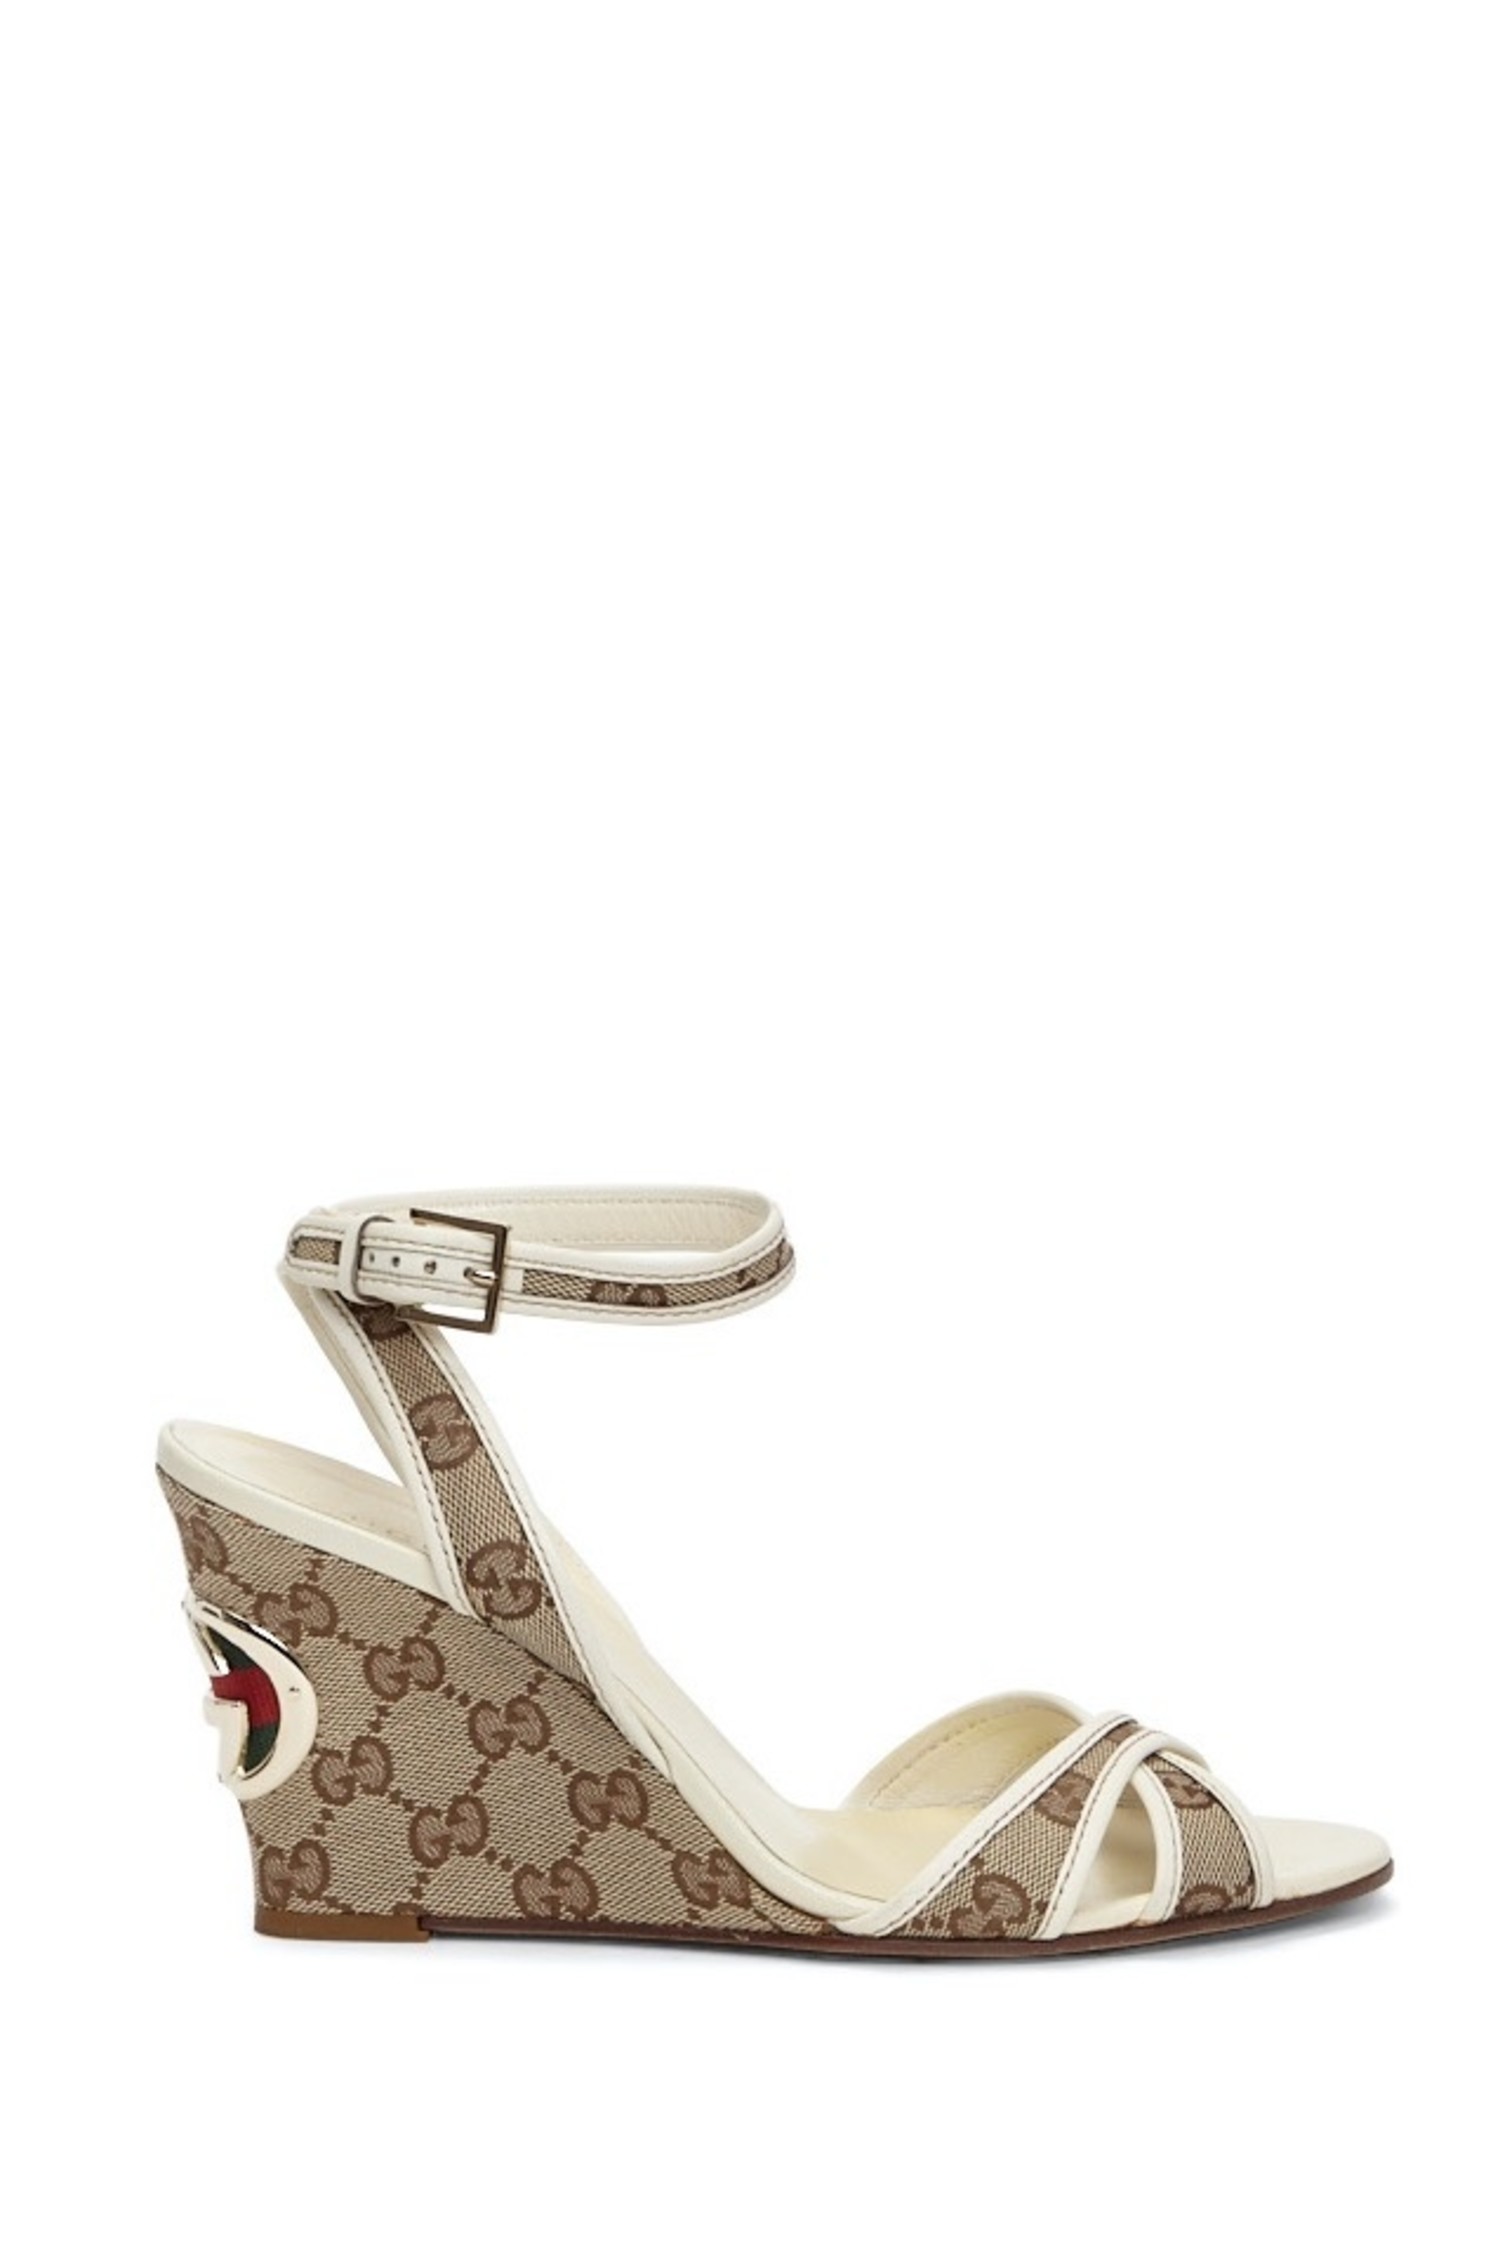 gucci white wedges